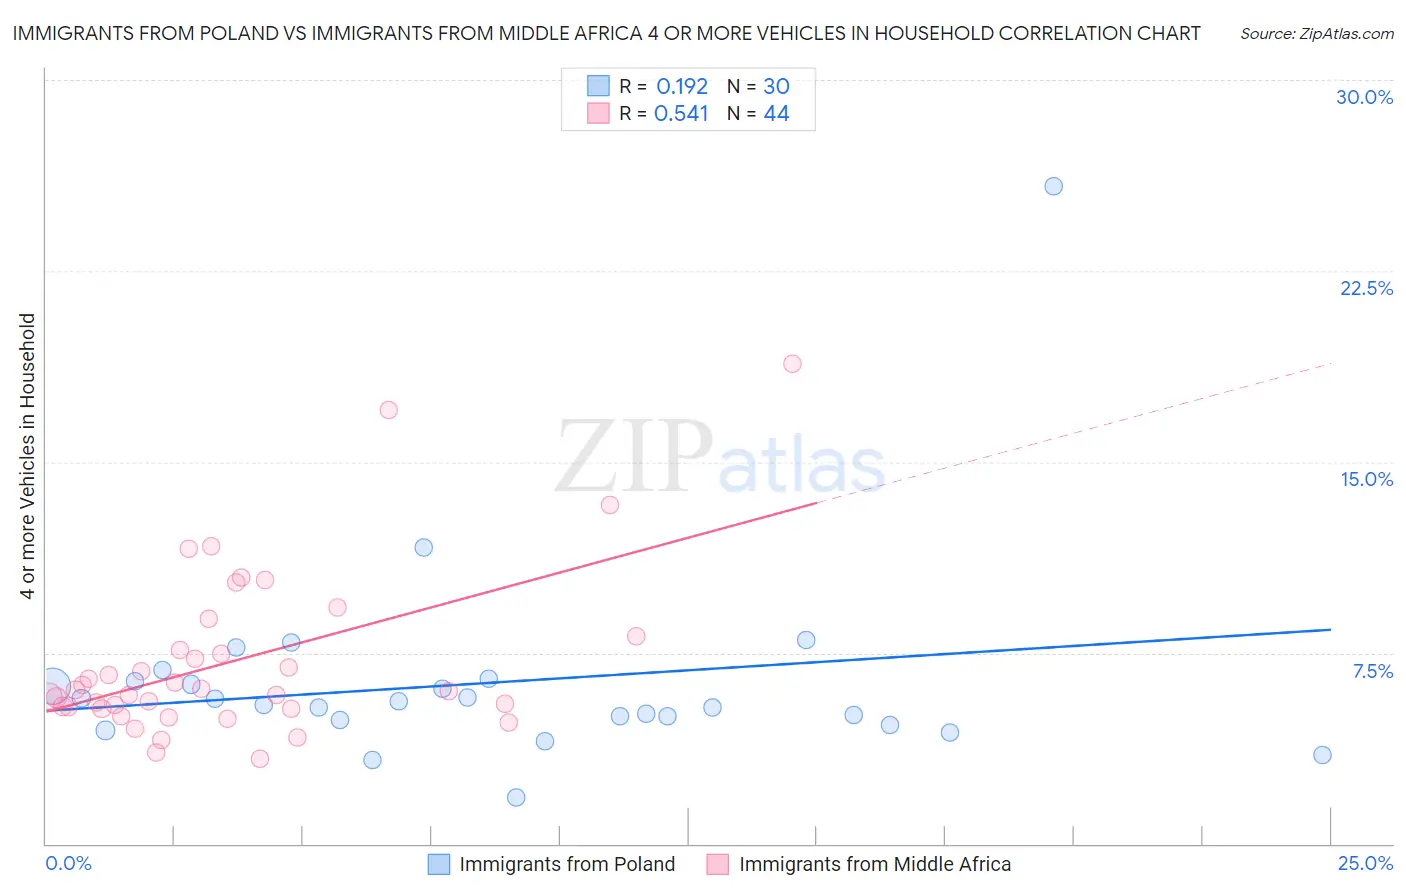 Immigrants from Poland vs Immigrants from Middle Africa 4 or more Vehicles in Household